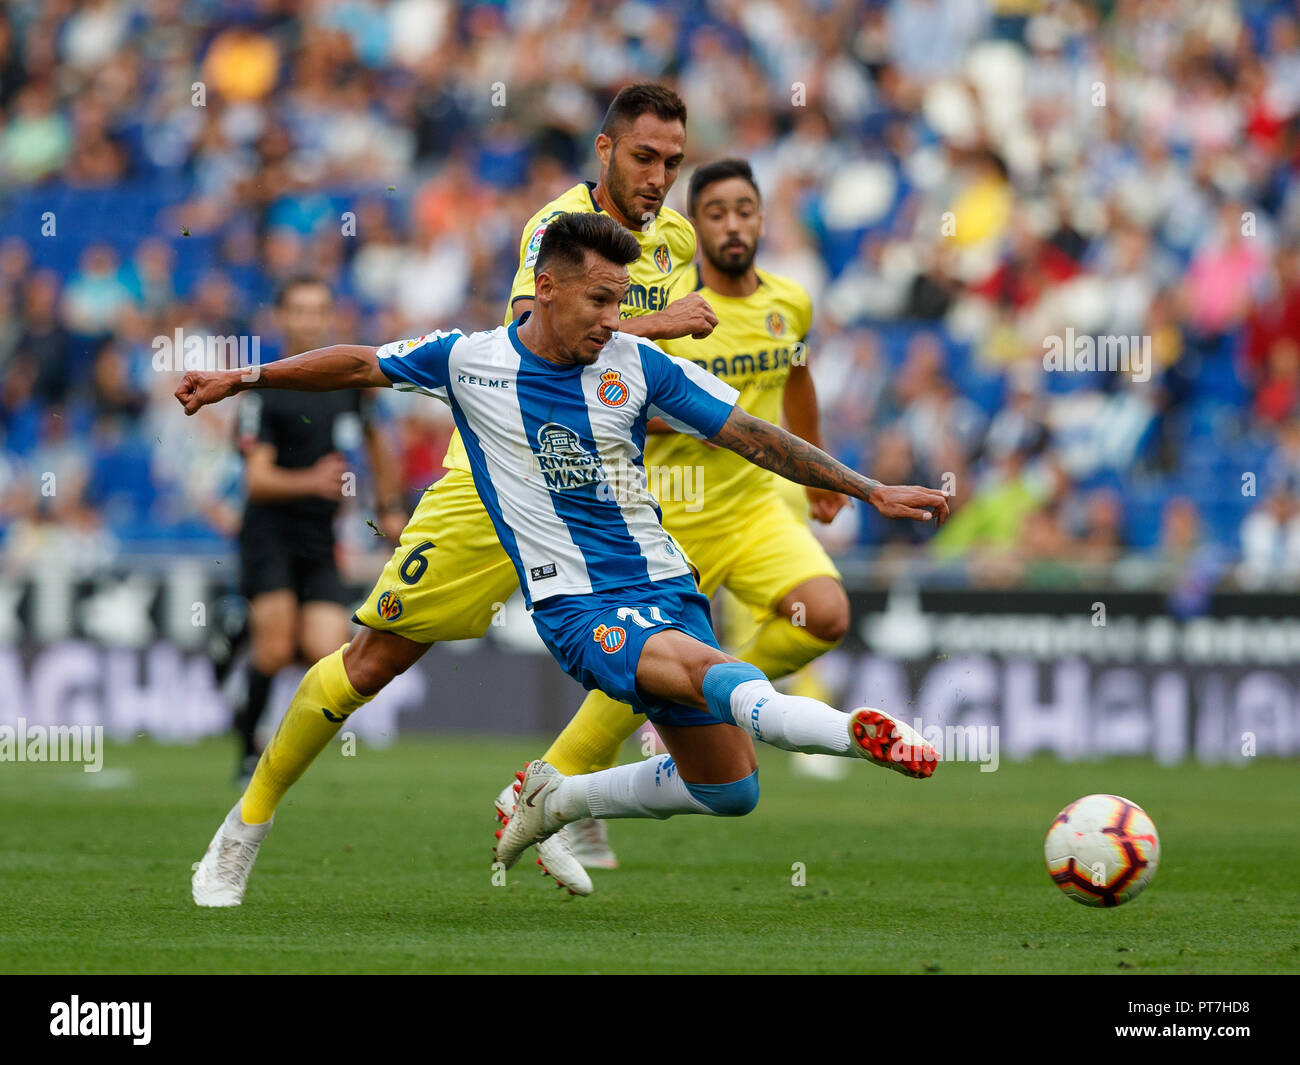 Barcelona, Spain. 7th Oct 2018. Hernan Perez, player of RCD Espanyol in  action with Victor Ruiz, player of Villarreal CF during the 2018/2019  LaLiga Santander Round 8 game between RCD Espanyol and